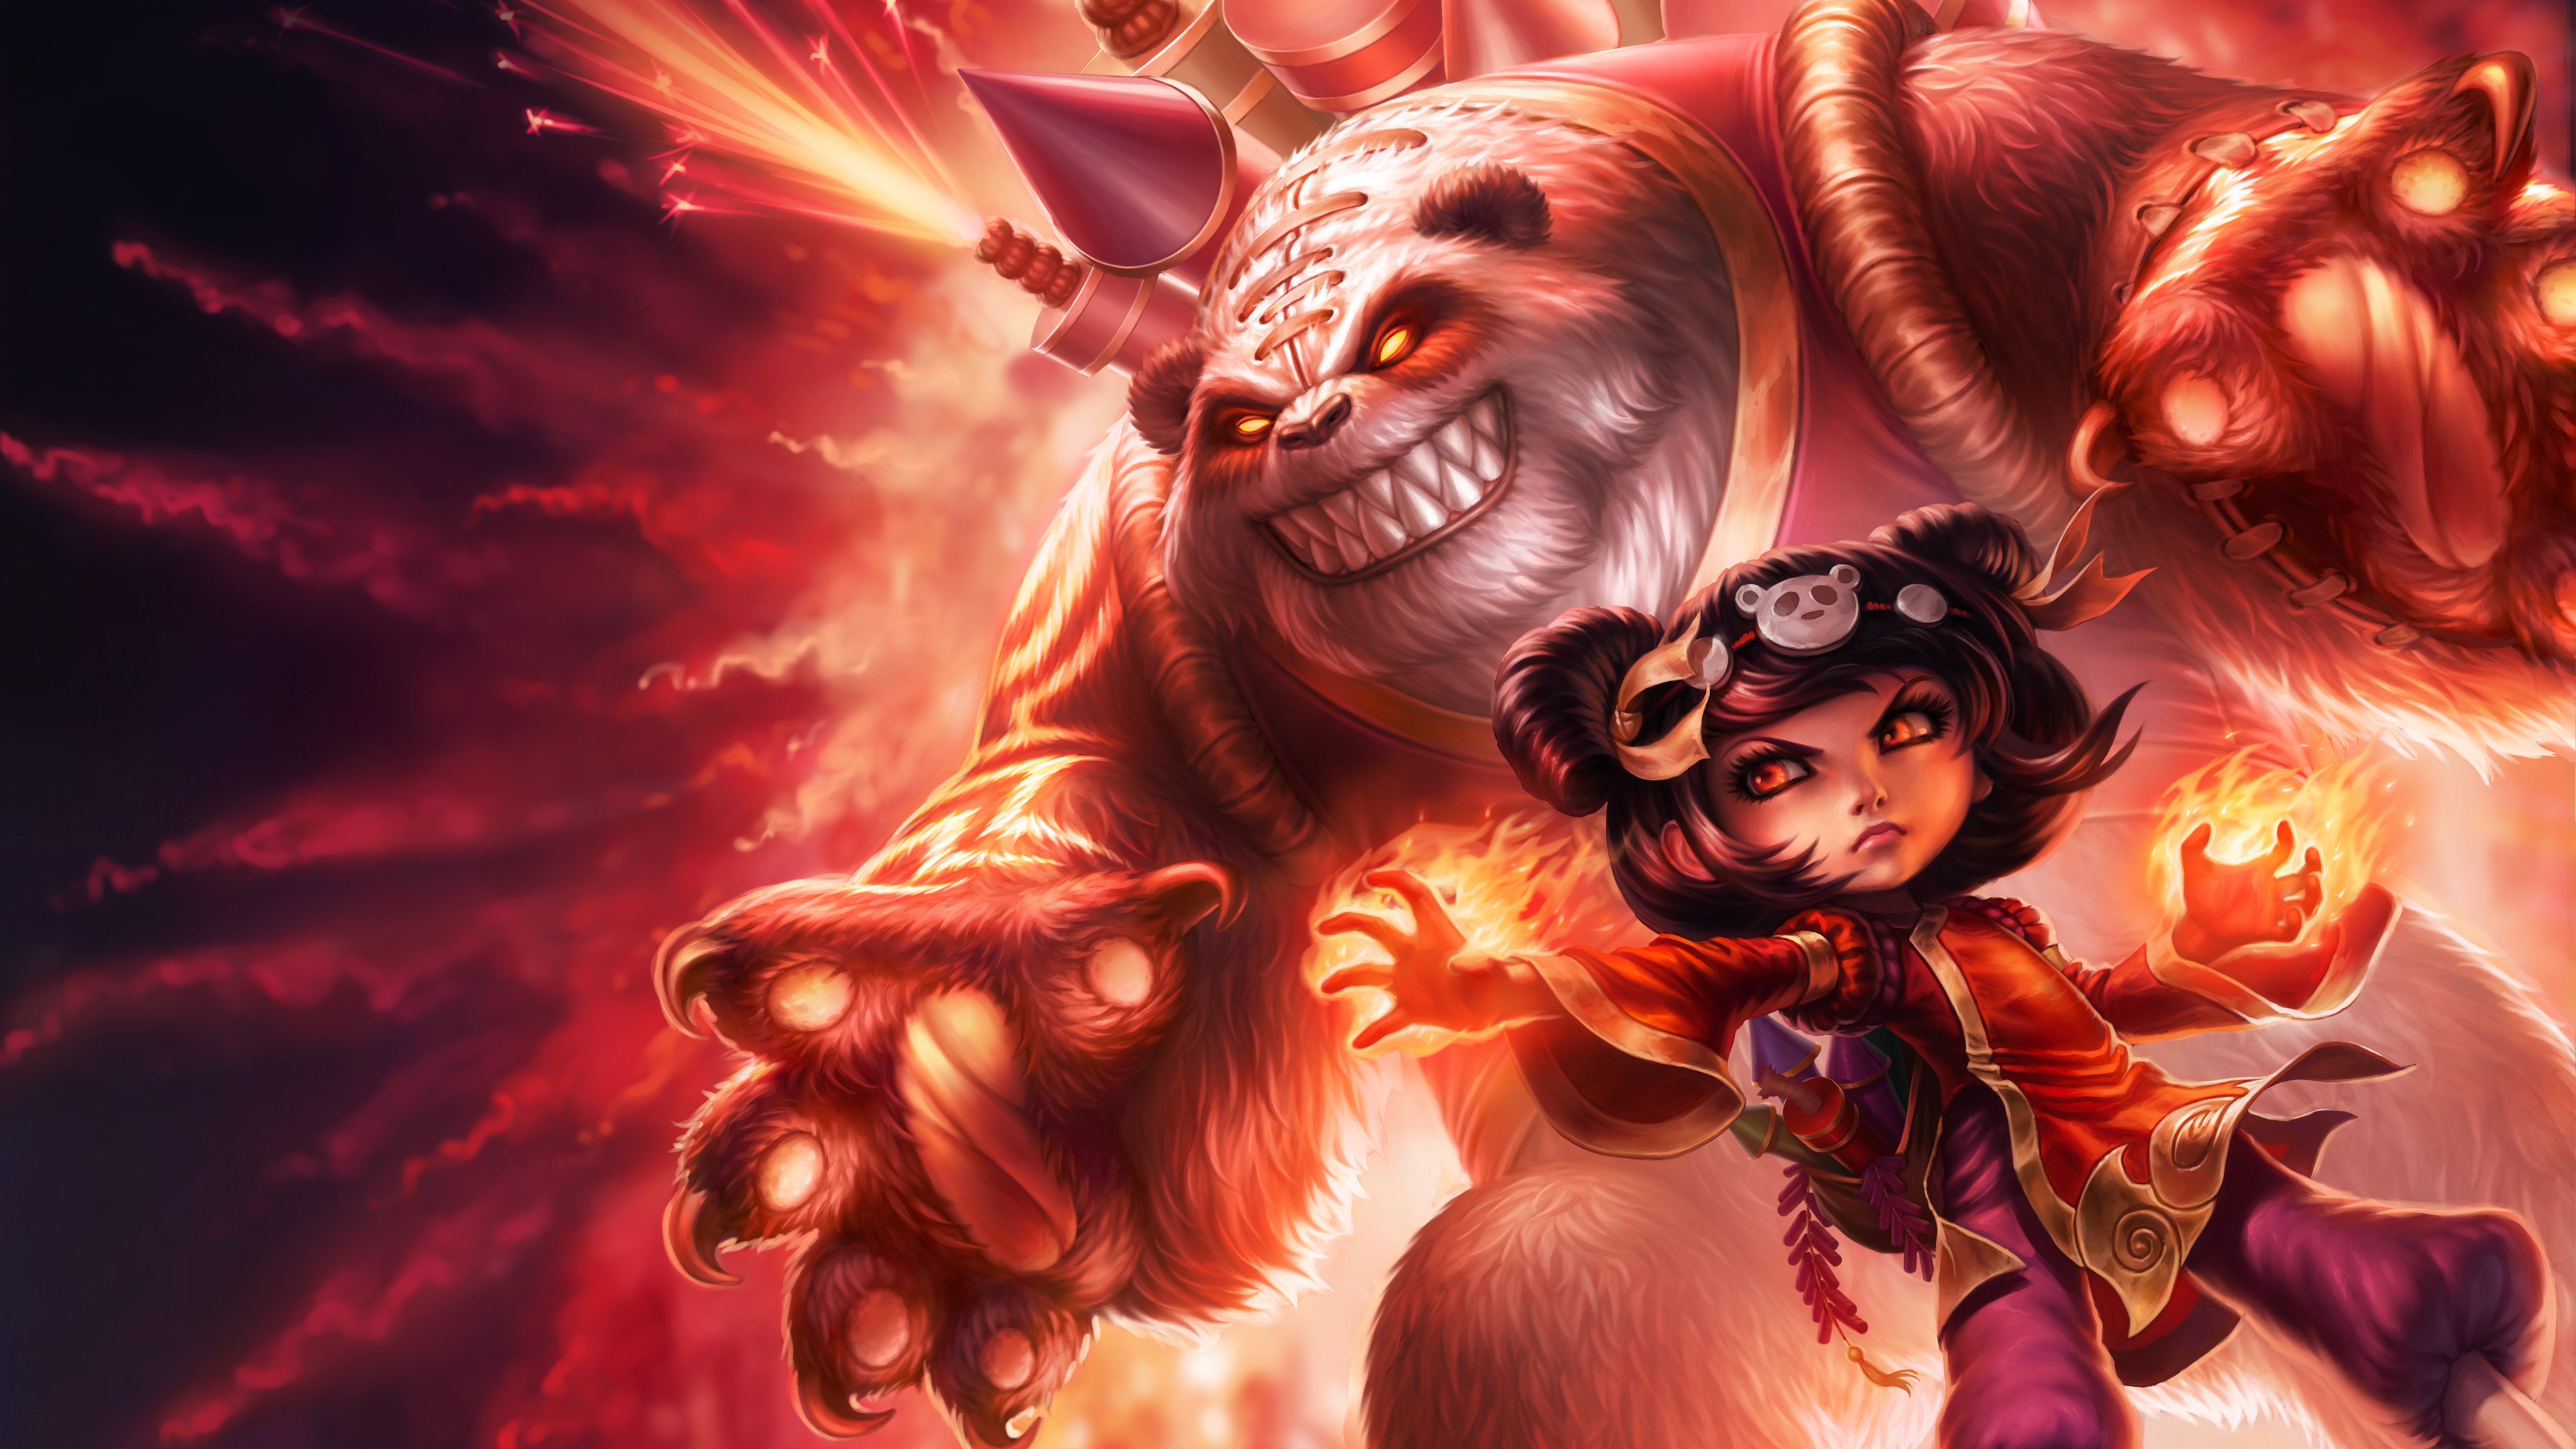 Annie Wallpapers